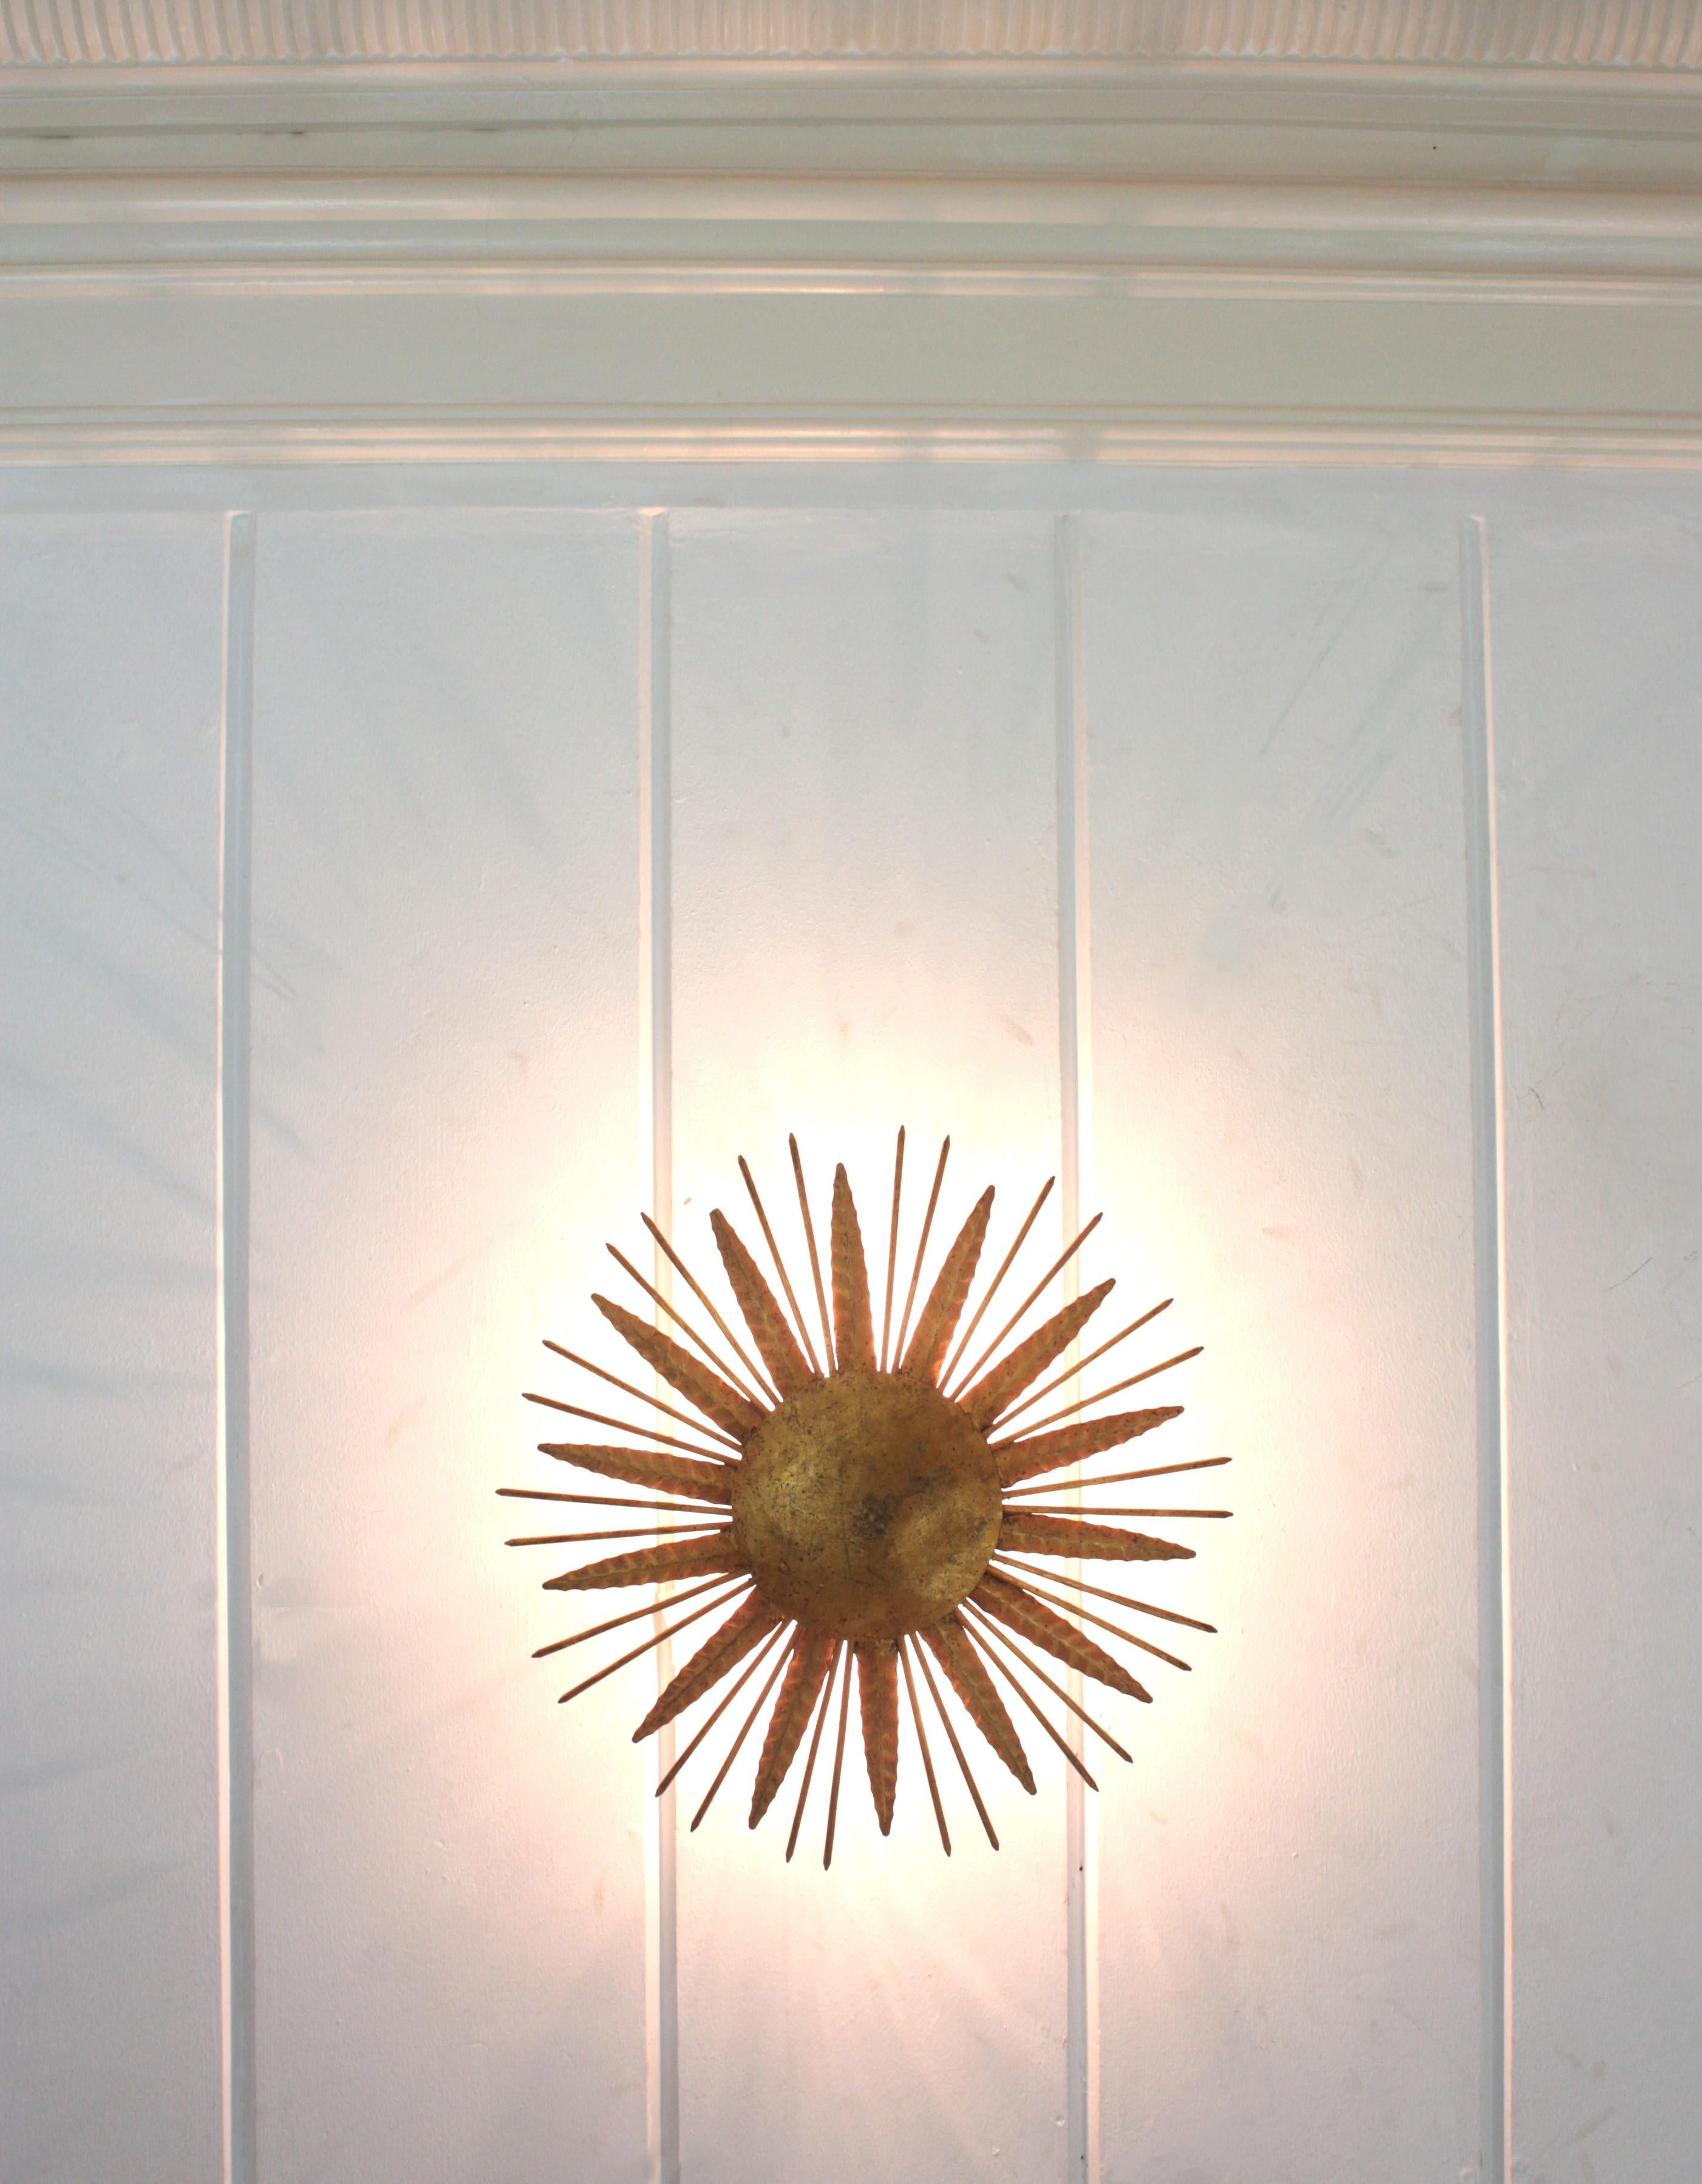 French Sunburst Spikey Light Fixture in Gilt Iron, 1940s For Sale 2